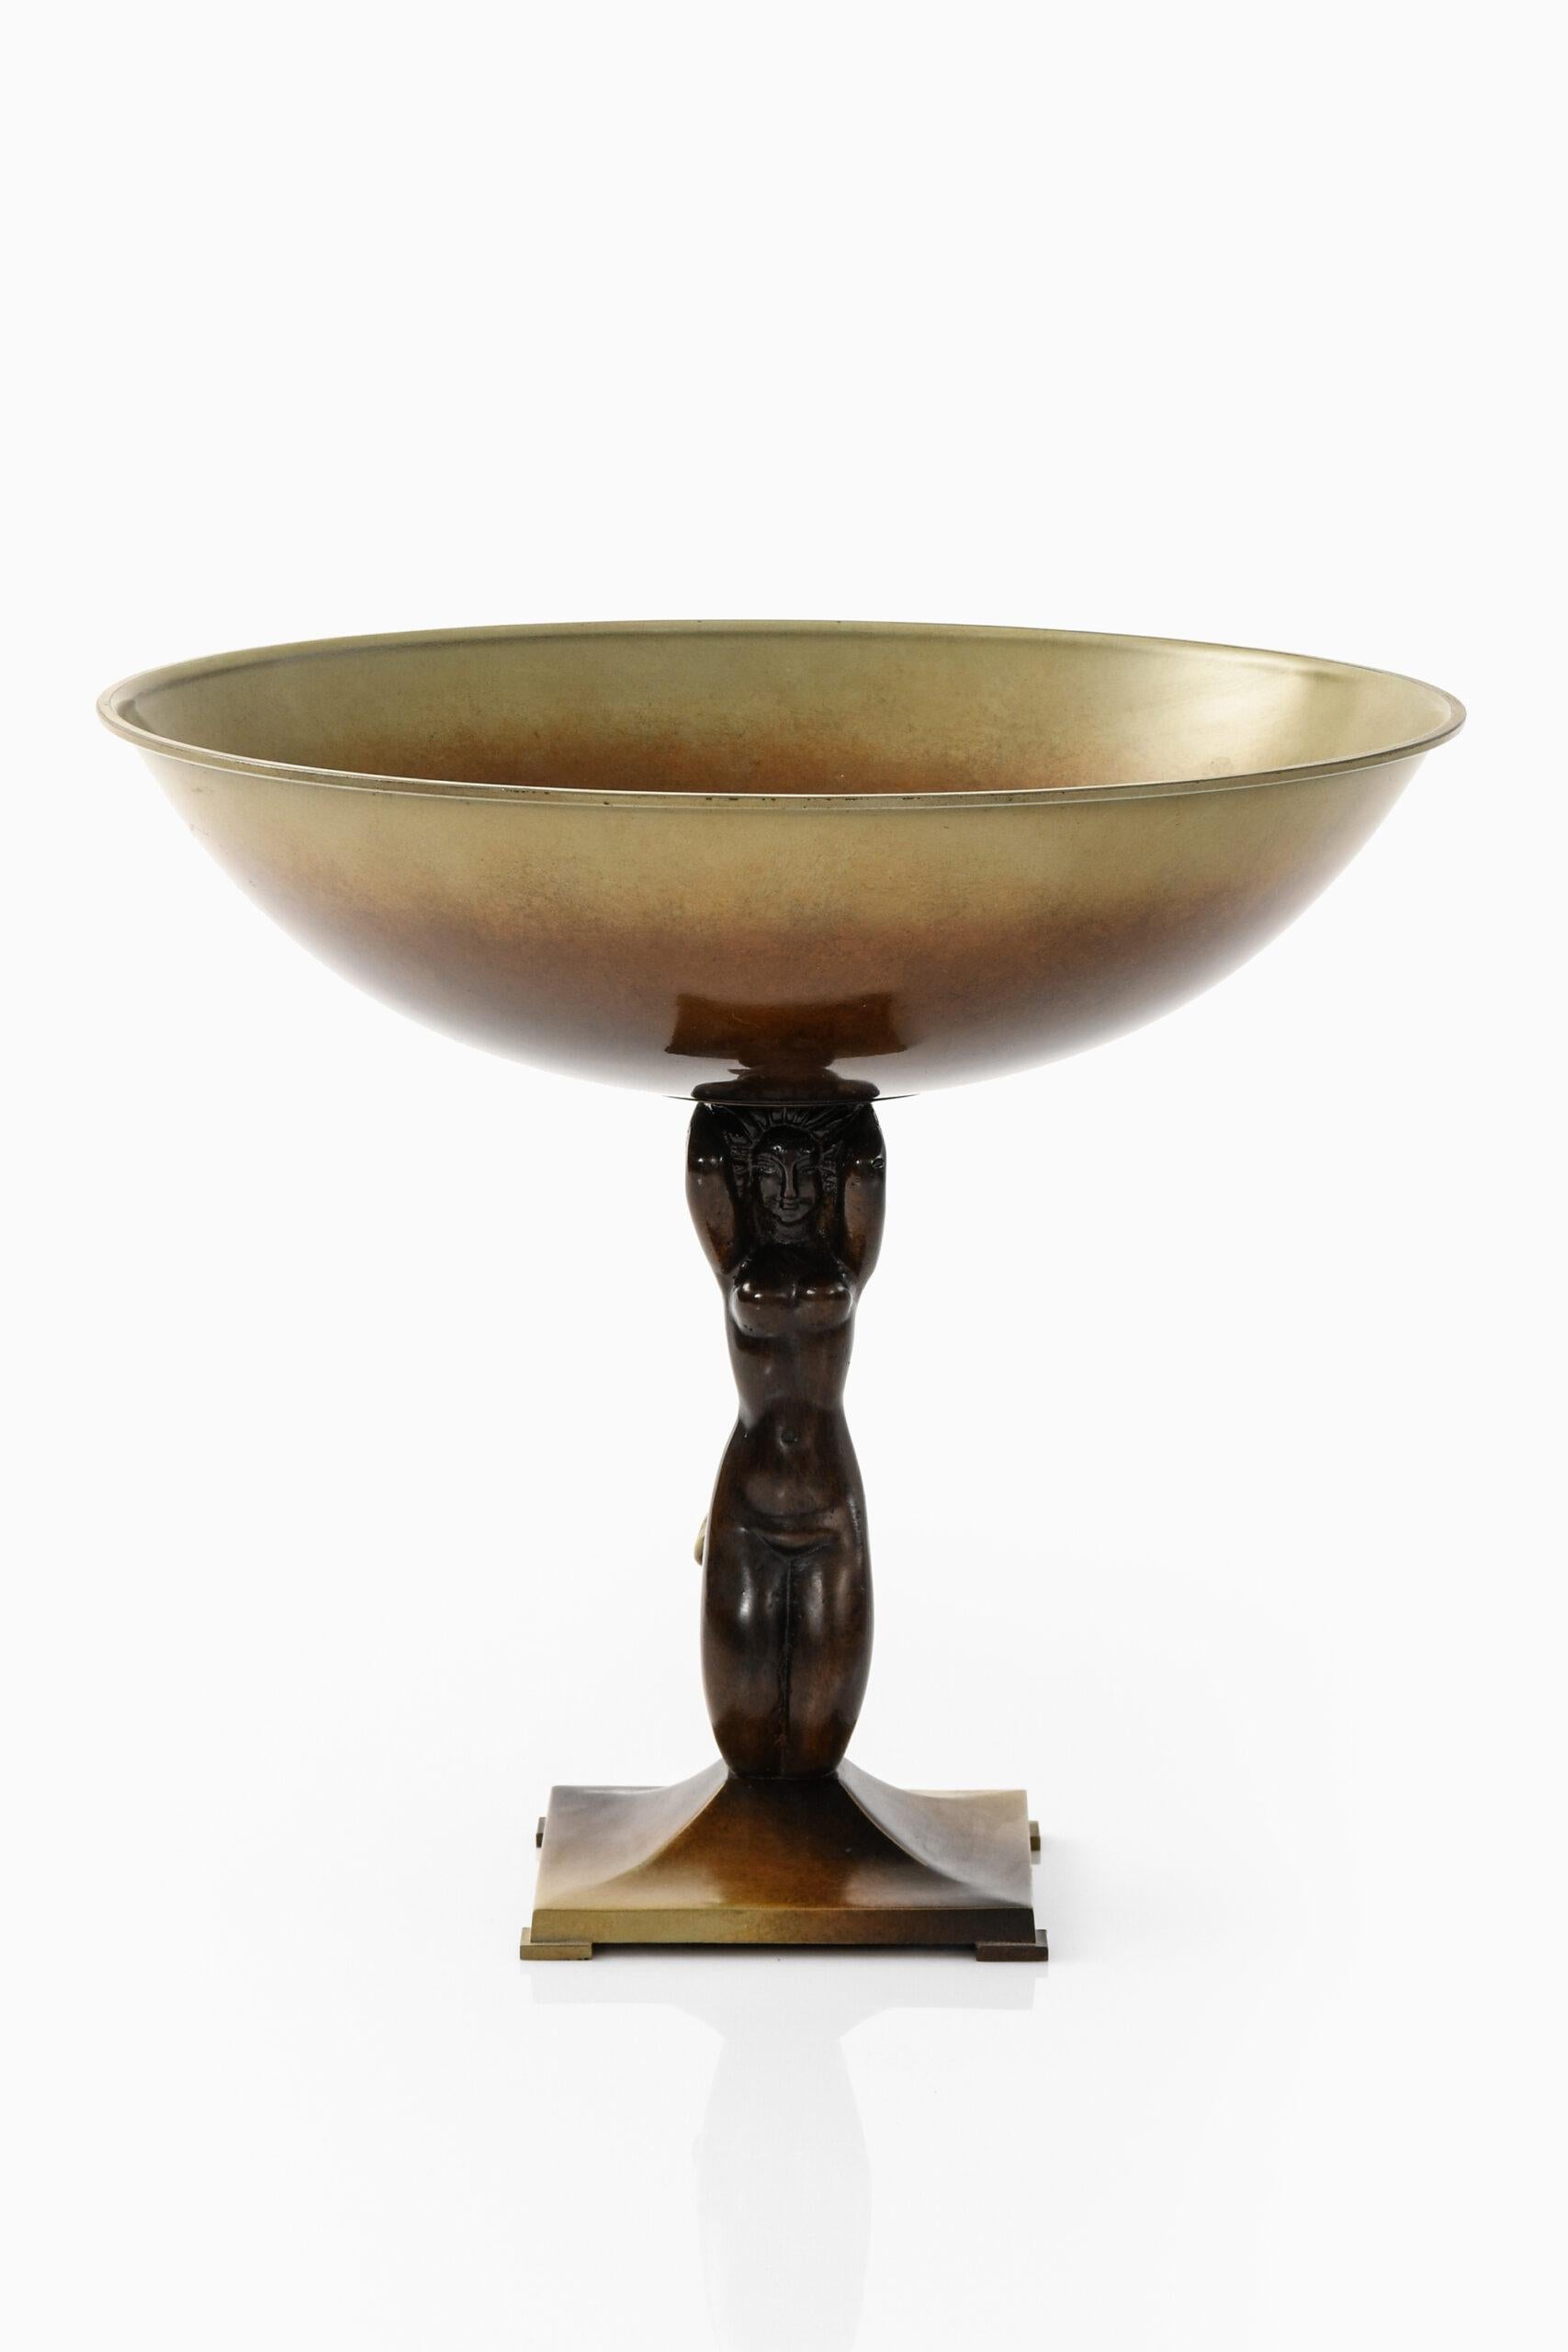 Large decorative bowl by unknown designer. Produced by Ystad Metall in Sweden.